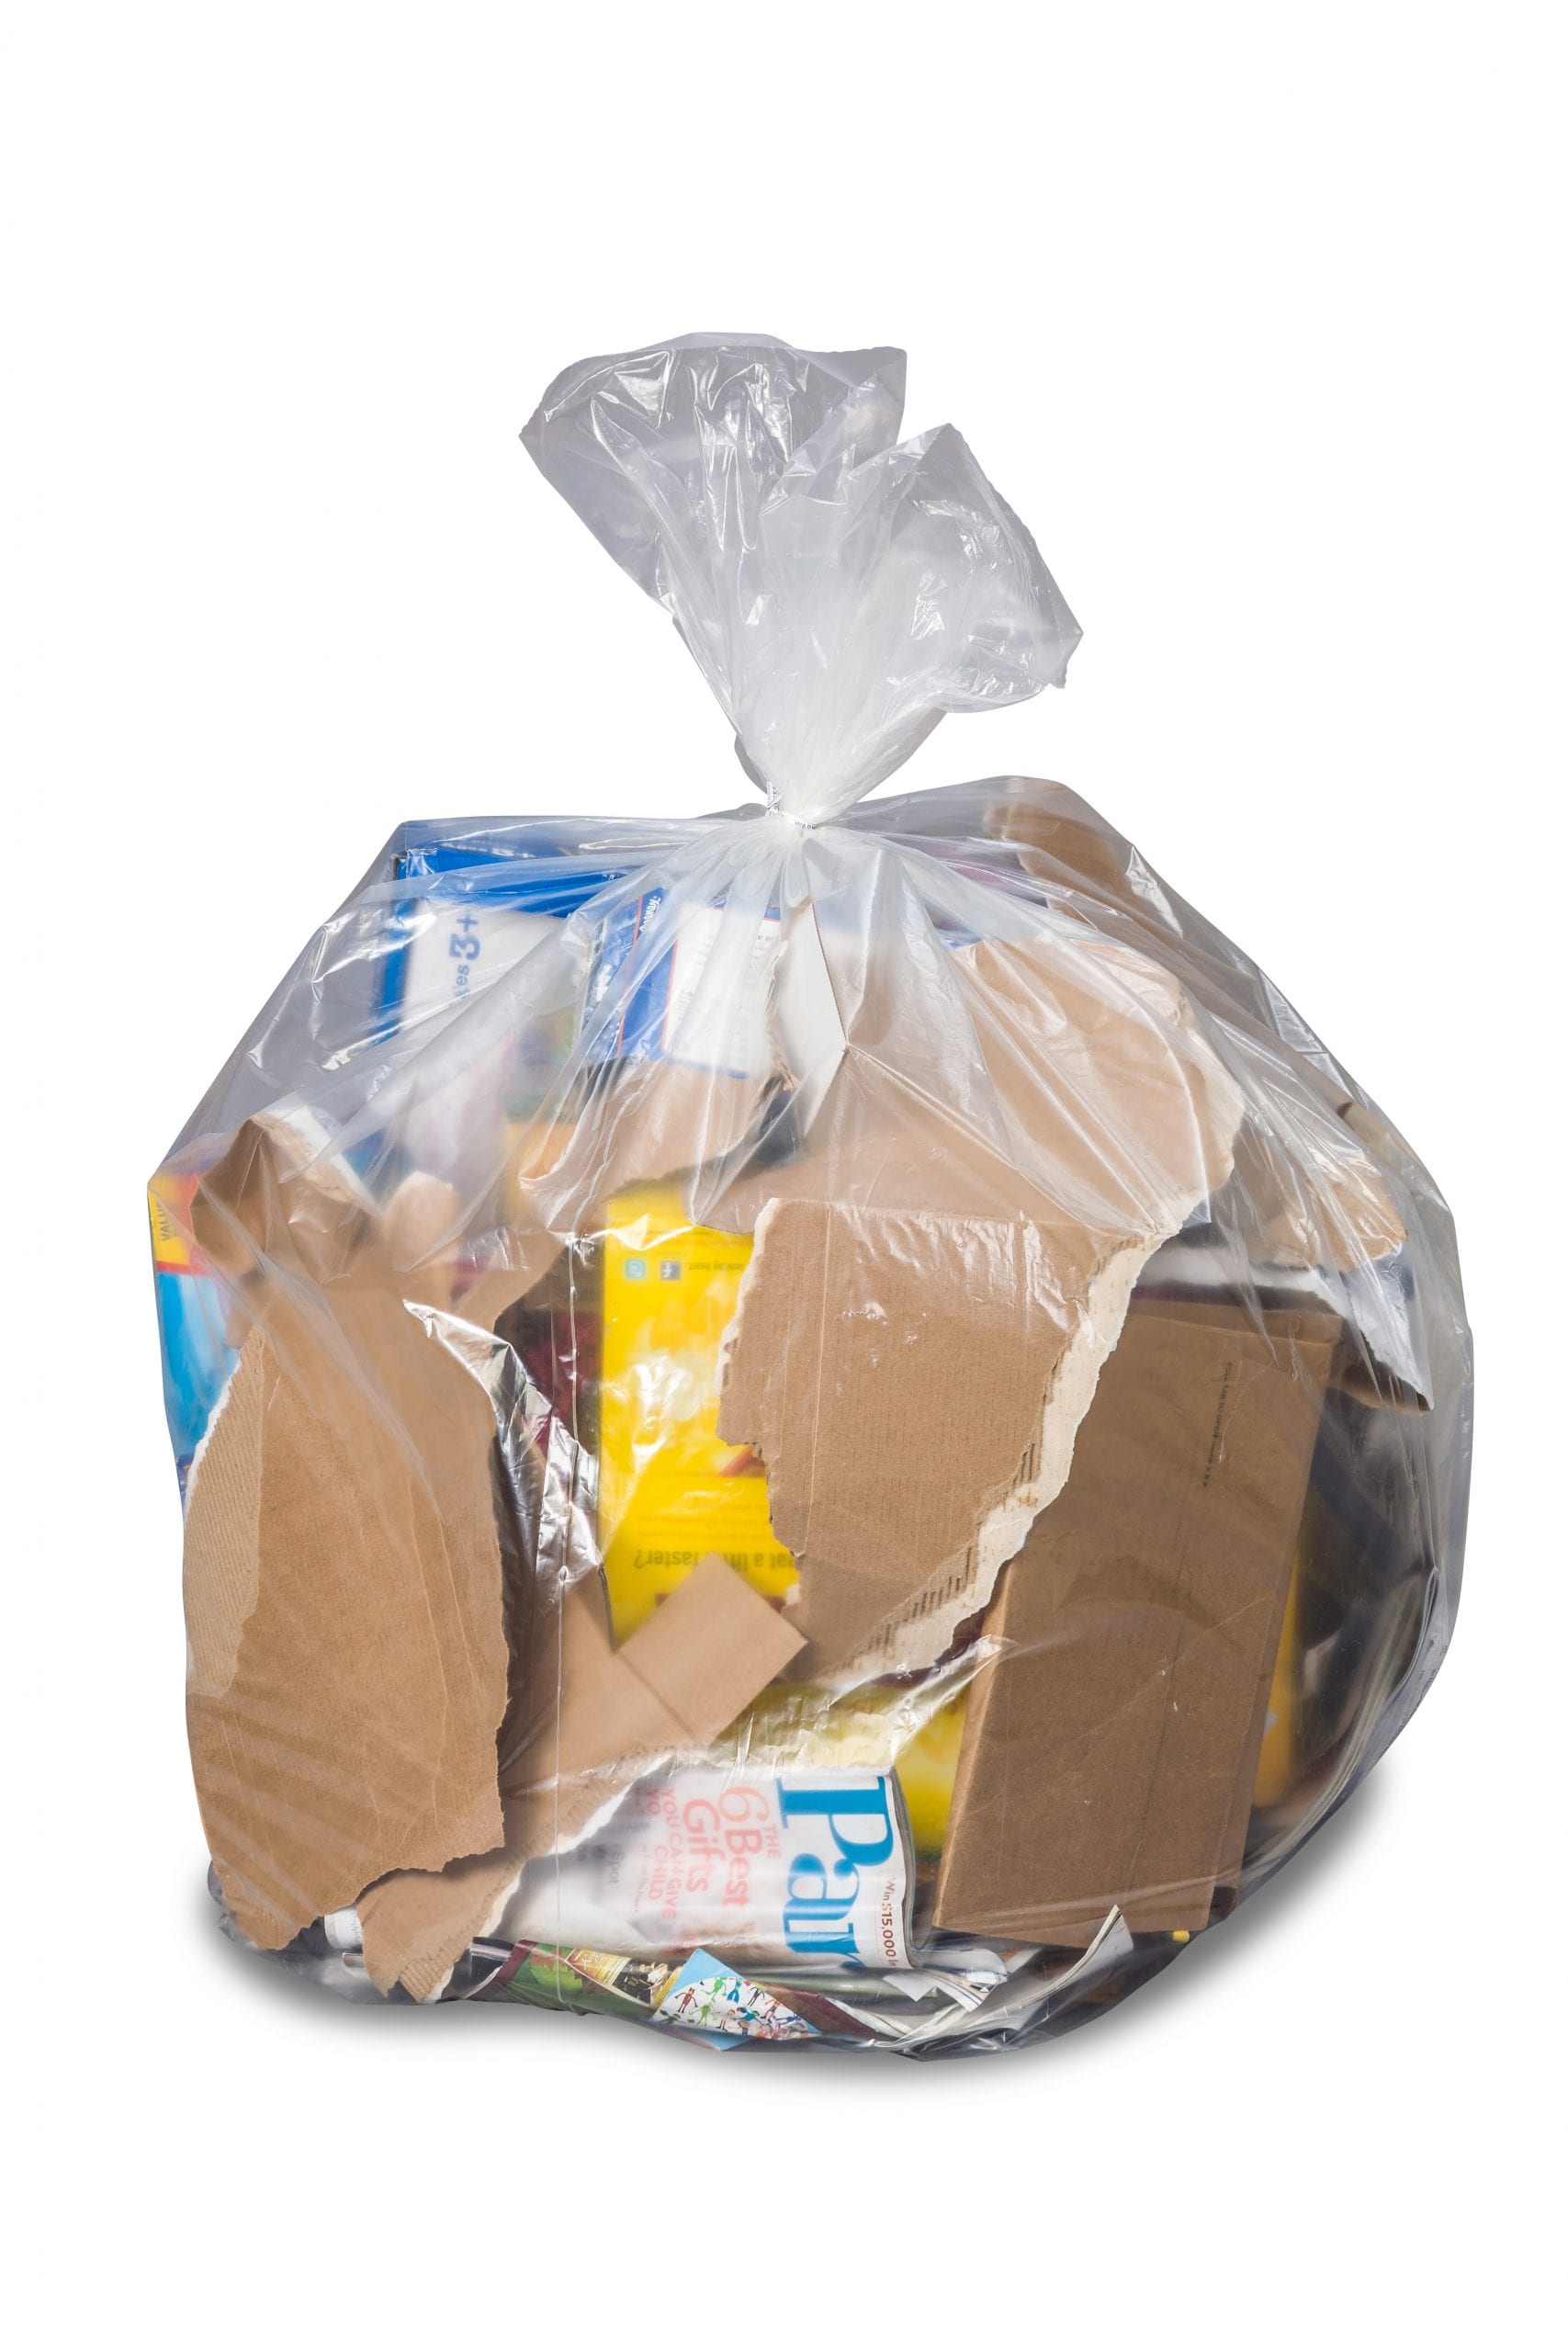 Clear Recycling Bags - Dependable Plastic